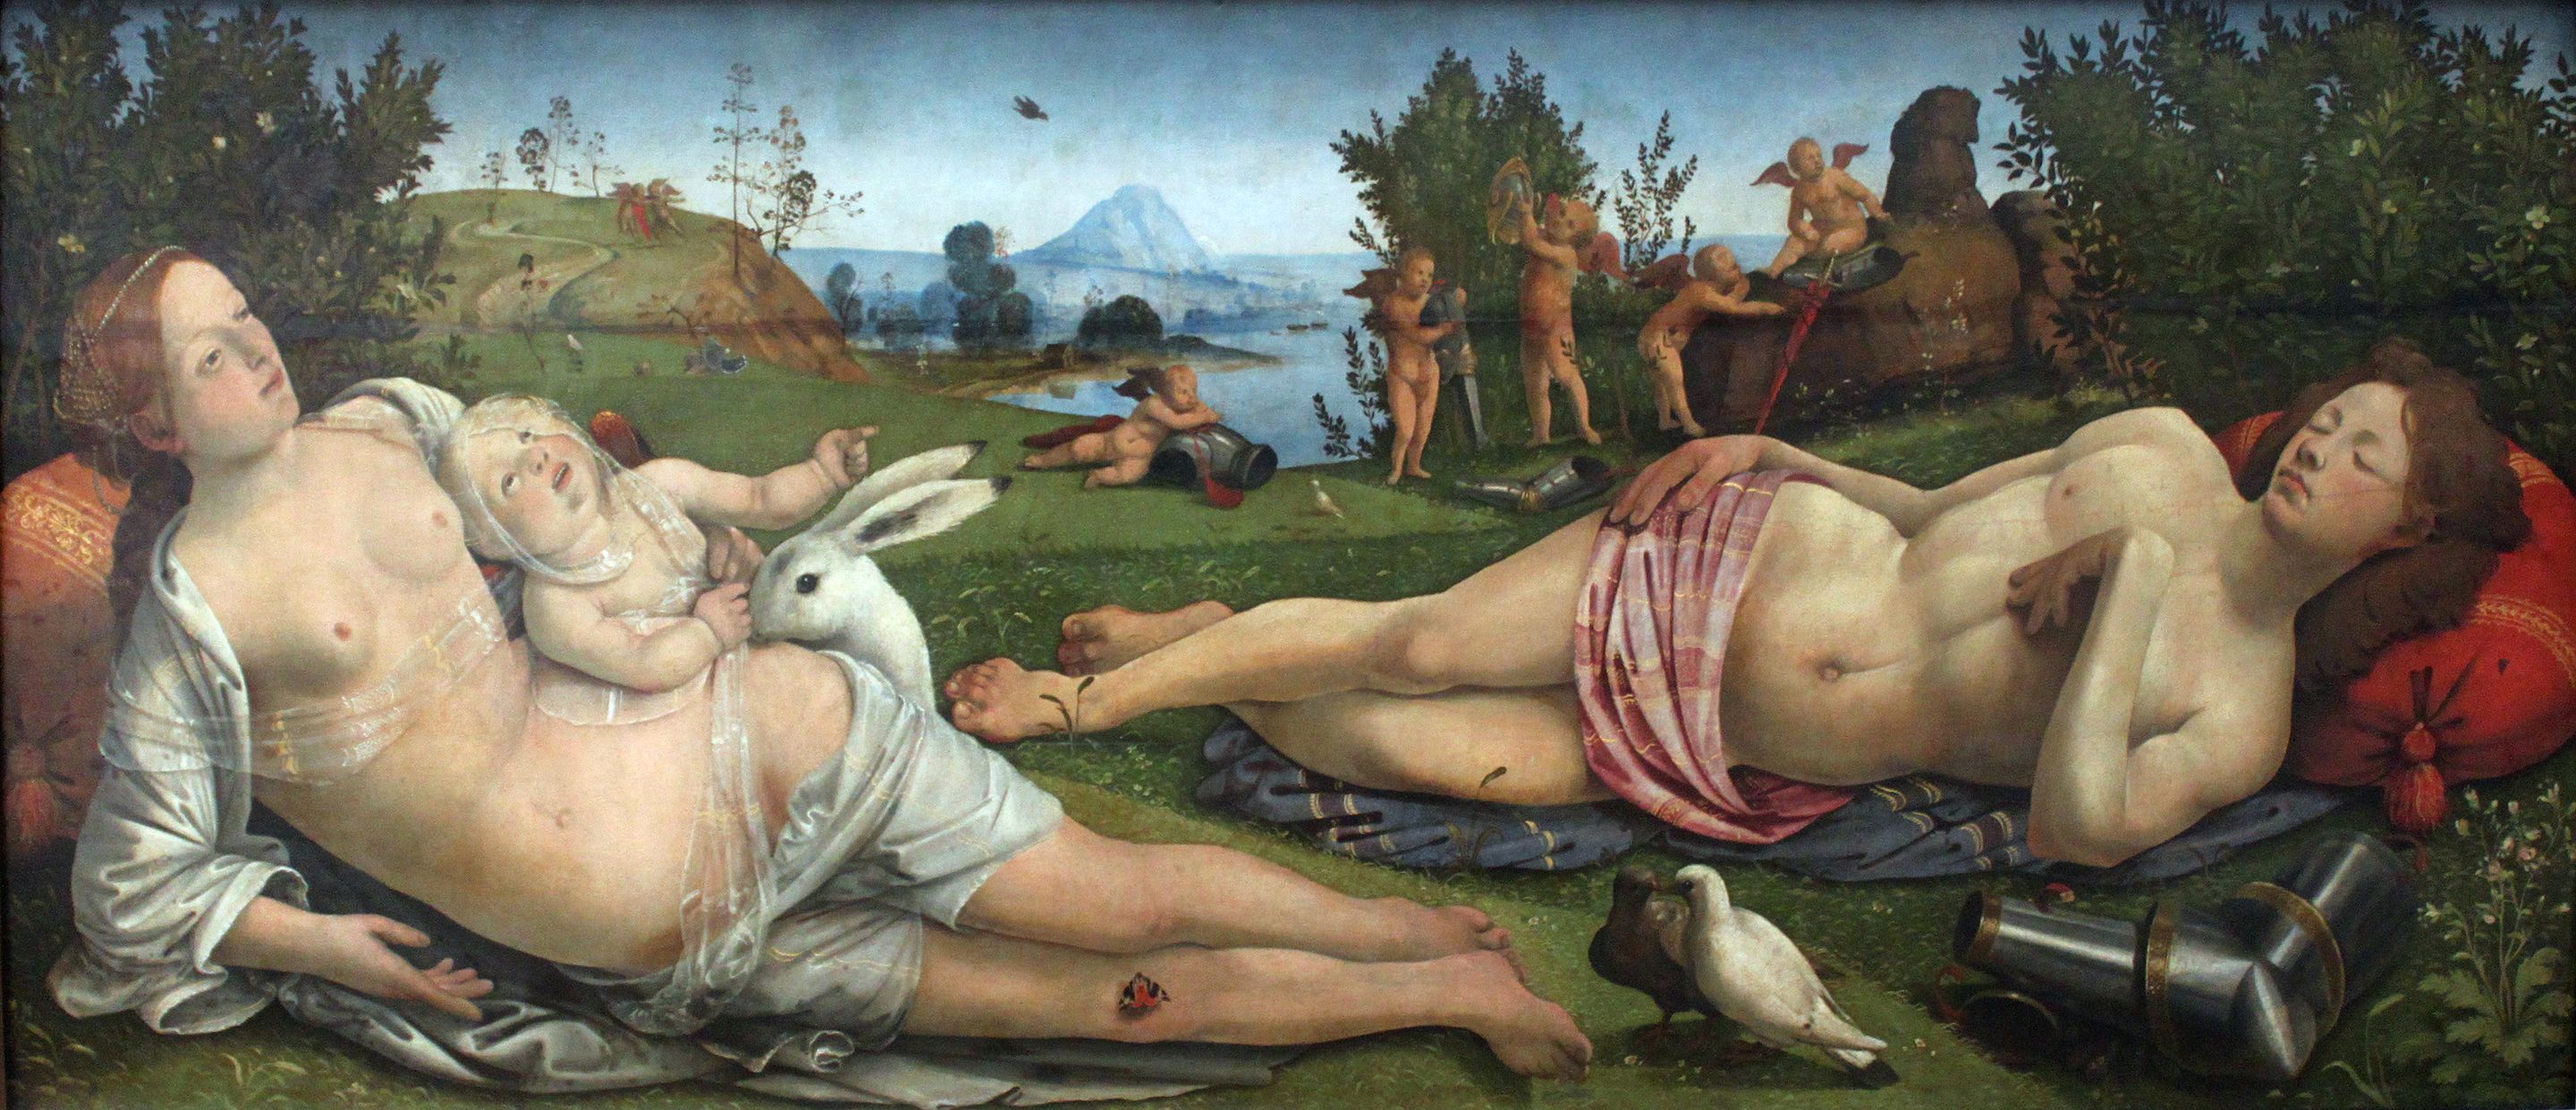 This painting of Venus, Mars and Cupid by Italian artist Piero di Cosimo features a white hare.